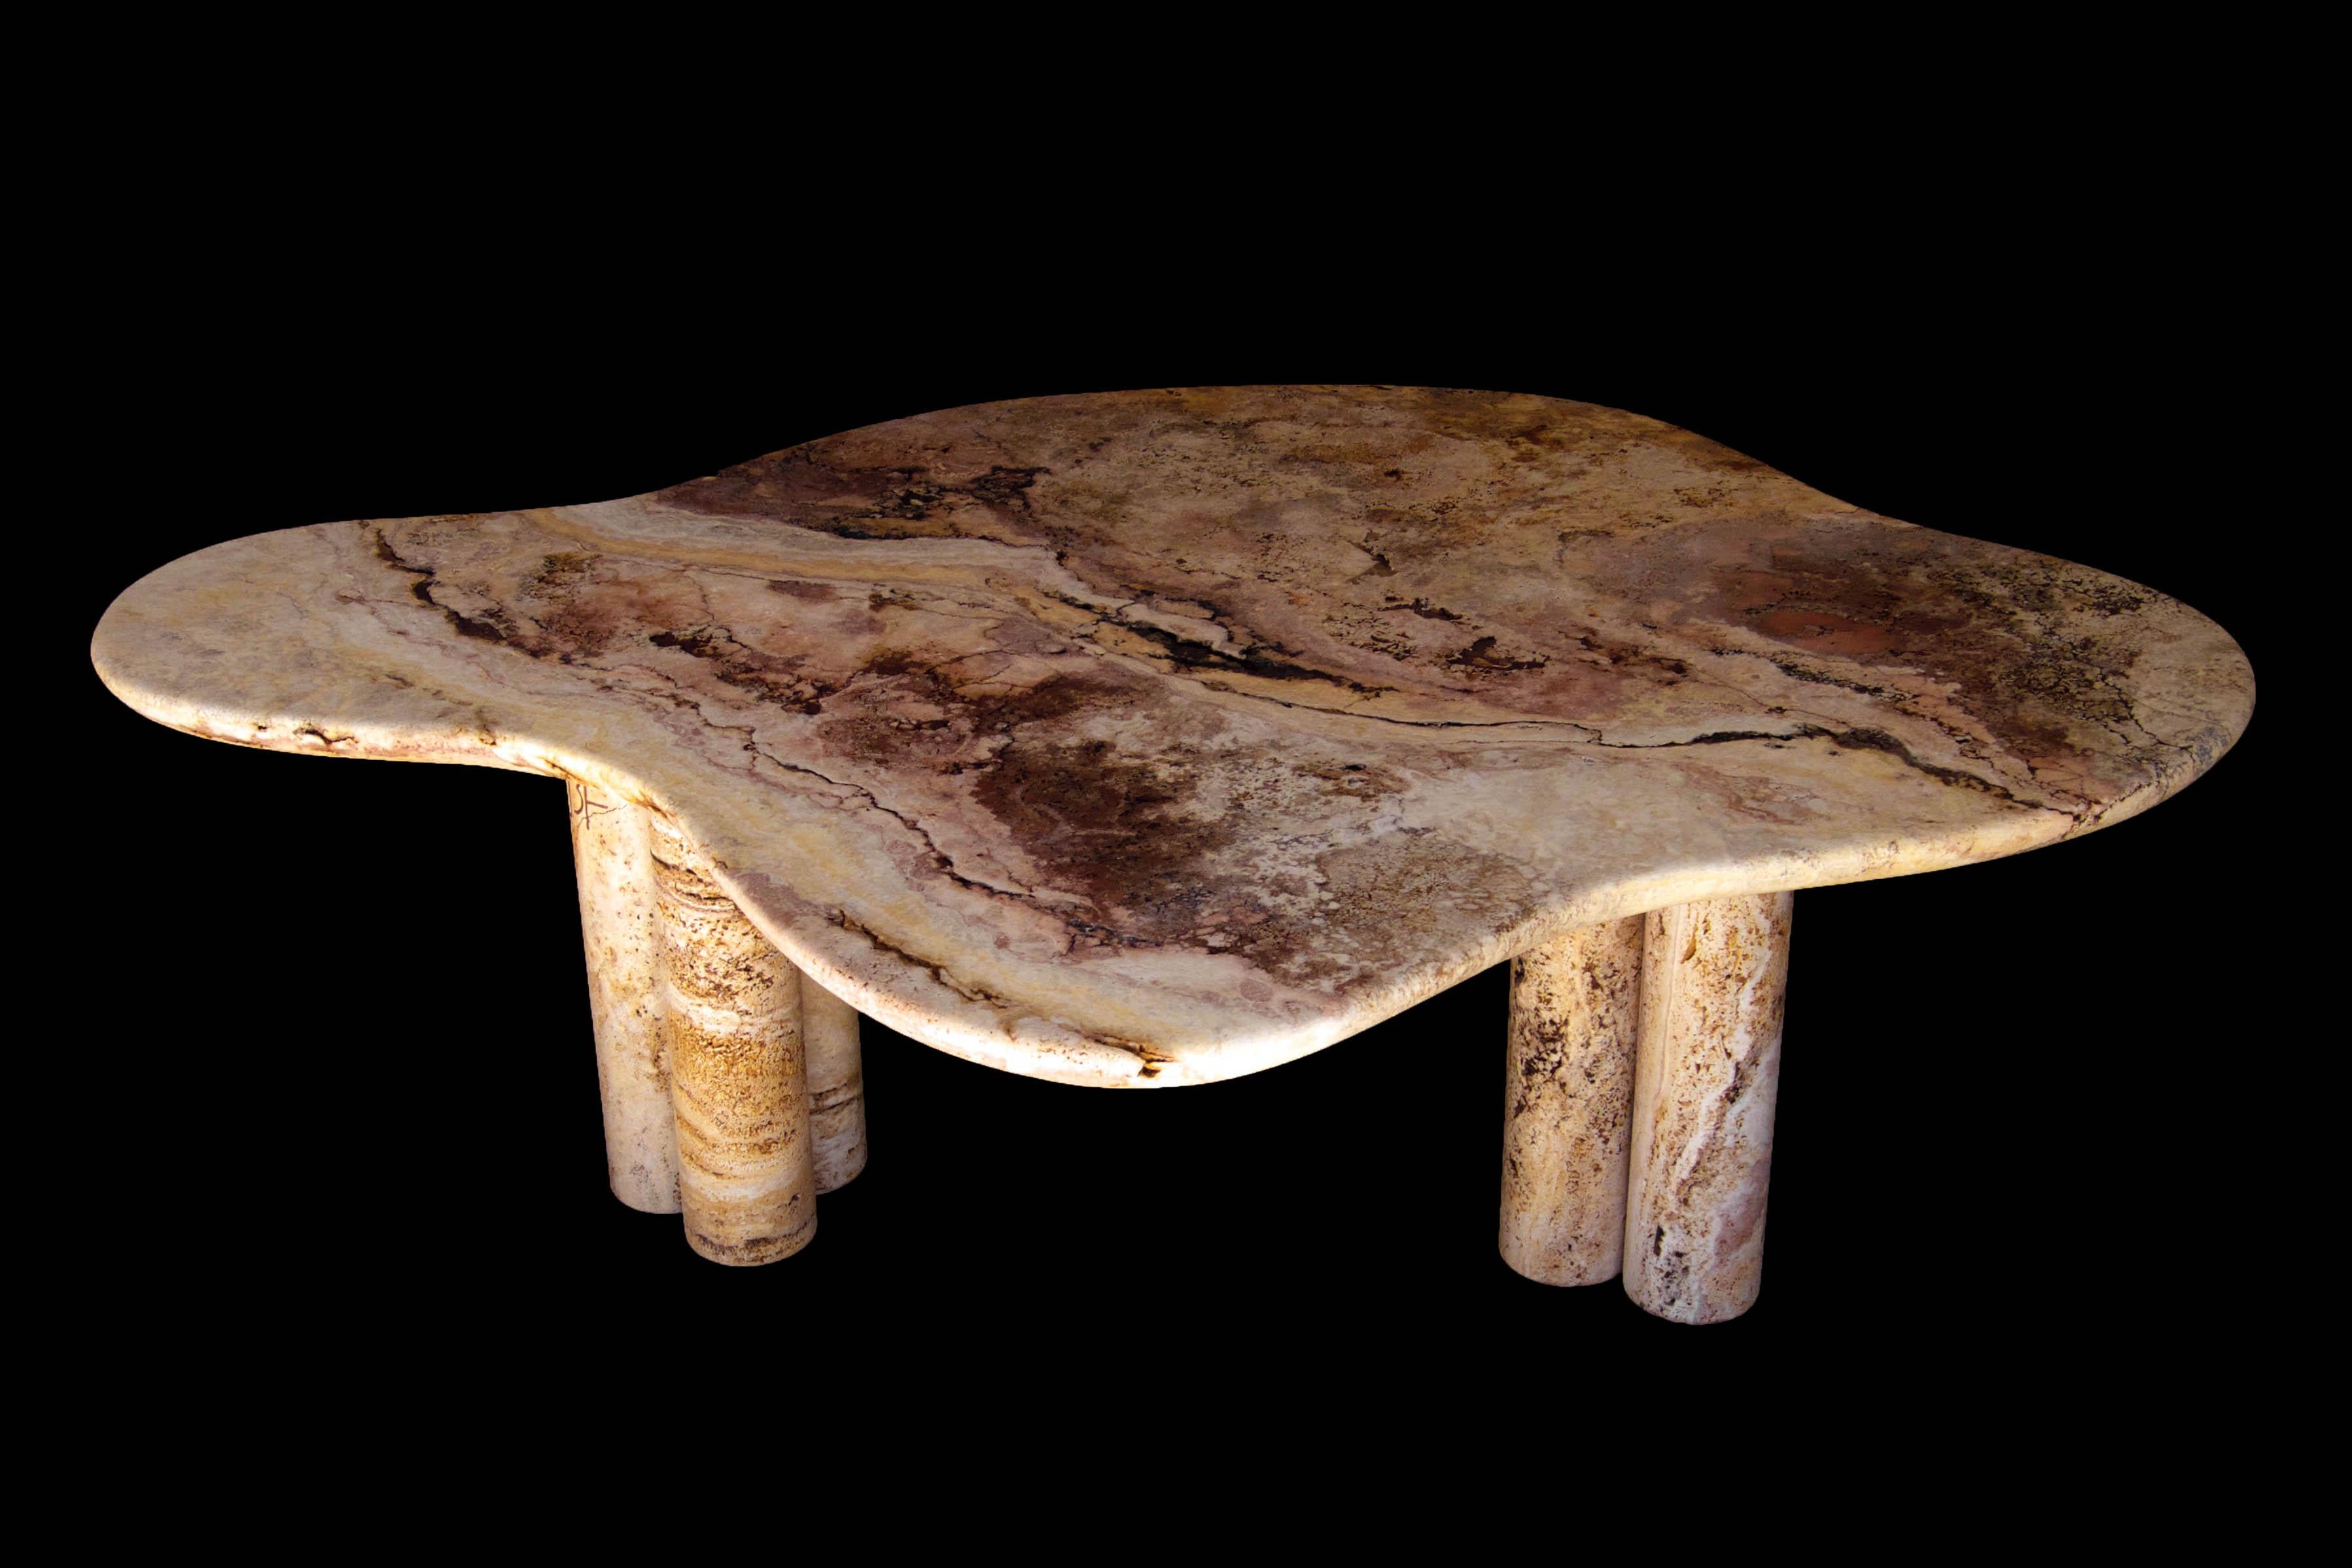 Martinique large coffee table by Jean-Fréderic Bourdier
Dimensions: D 144 x W 106 x H 43.5 cm
Materials: Travertine.
Also available in other height: 38.5 cm.

Mostly guided by his sculptor skills JFB and his life time strong attraction for